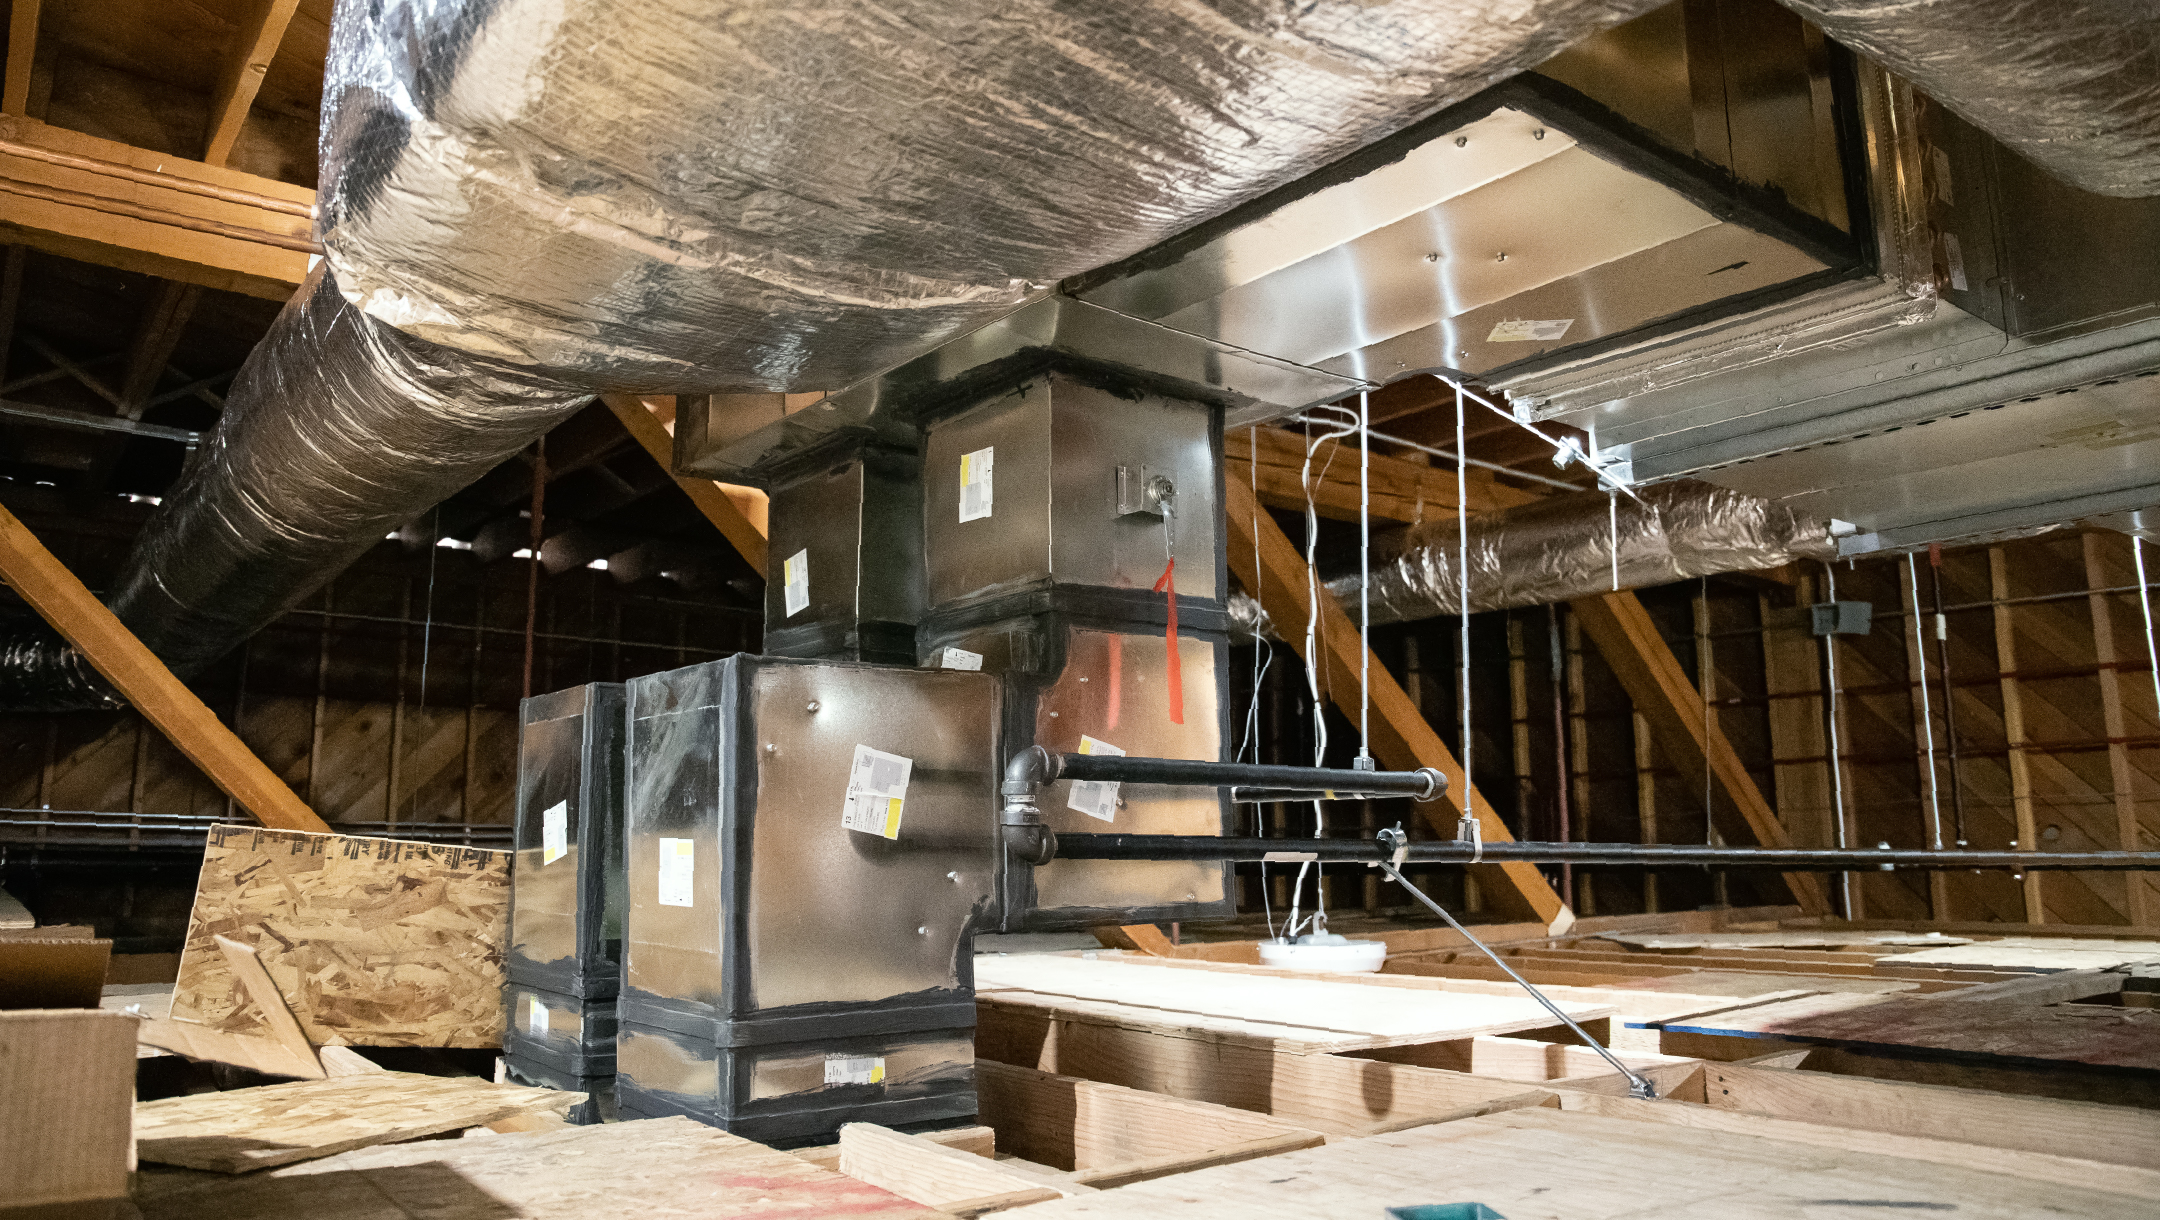 Photo of HVAC duct work in commercial building under construction near Klamath Falls